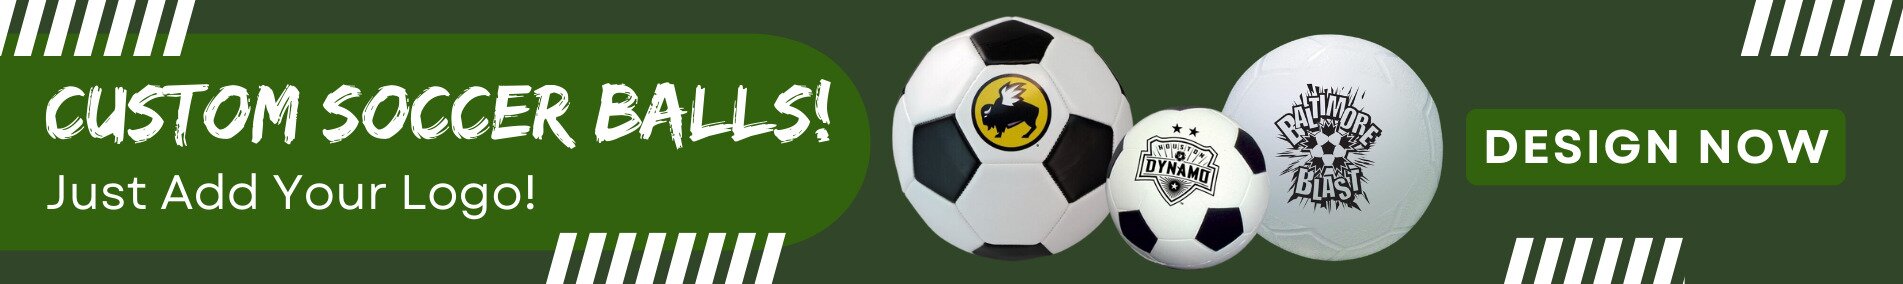 custom soccer products